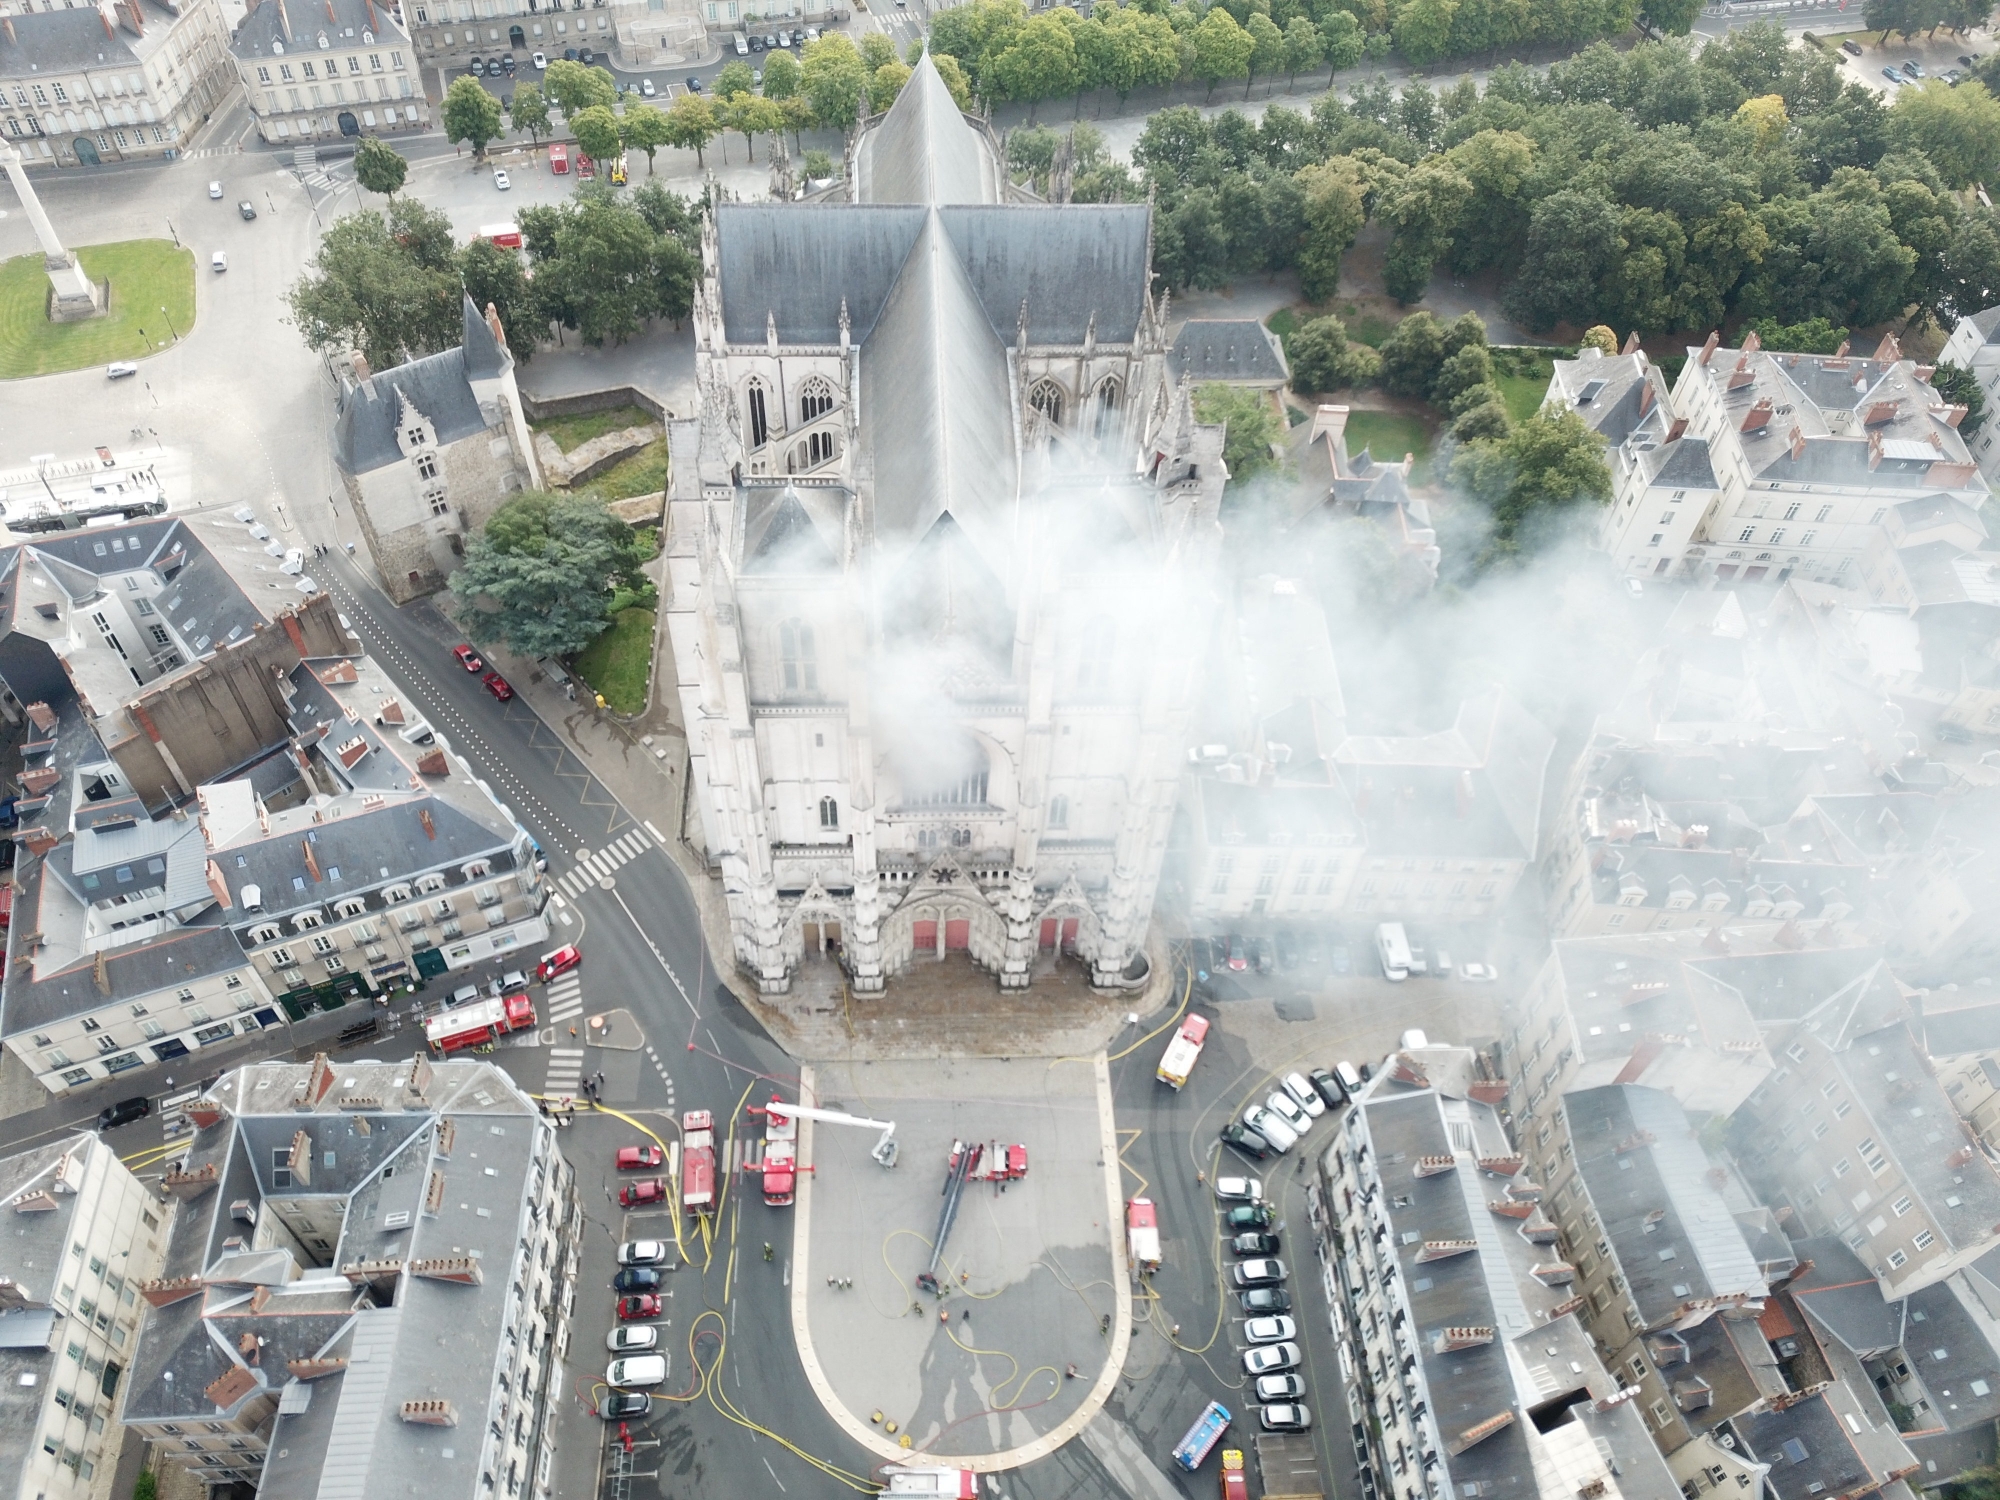 In this image provided by SDIS 44 Department of Fire and Rescue, fire fighters work to extinguish the blaze at the Gothic St. Peter and St. Paul Cathedral, in Nantes, western France, Saturday, July 18, 2020. French officials launched an arson inquiry Saturday after the fire broke out destroying the organ, shattered stained glass windows and sent black smoke spewing from between the cathedral towers. (SDIS 44 Department of Fire and Rescue via AP) ArcInfo